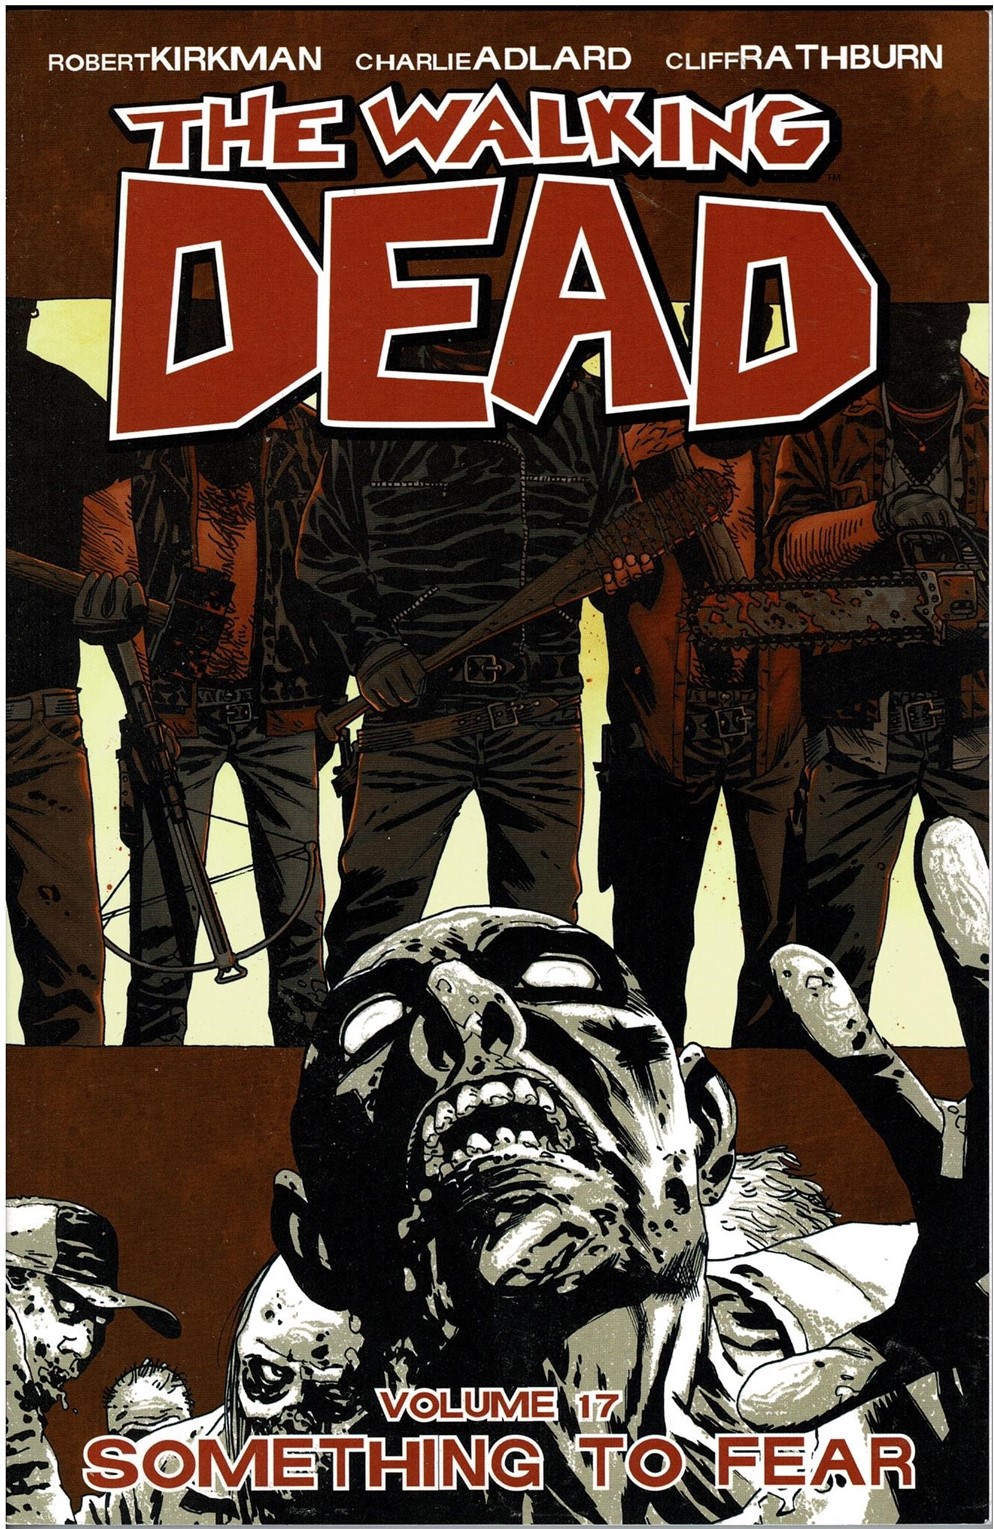 The Walking Dead Trade Paperback Volume 17 Something To Fear - Half Off!